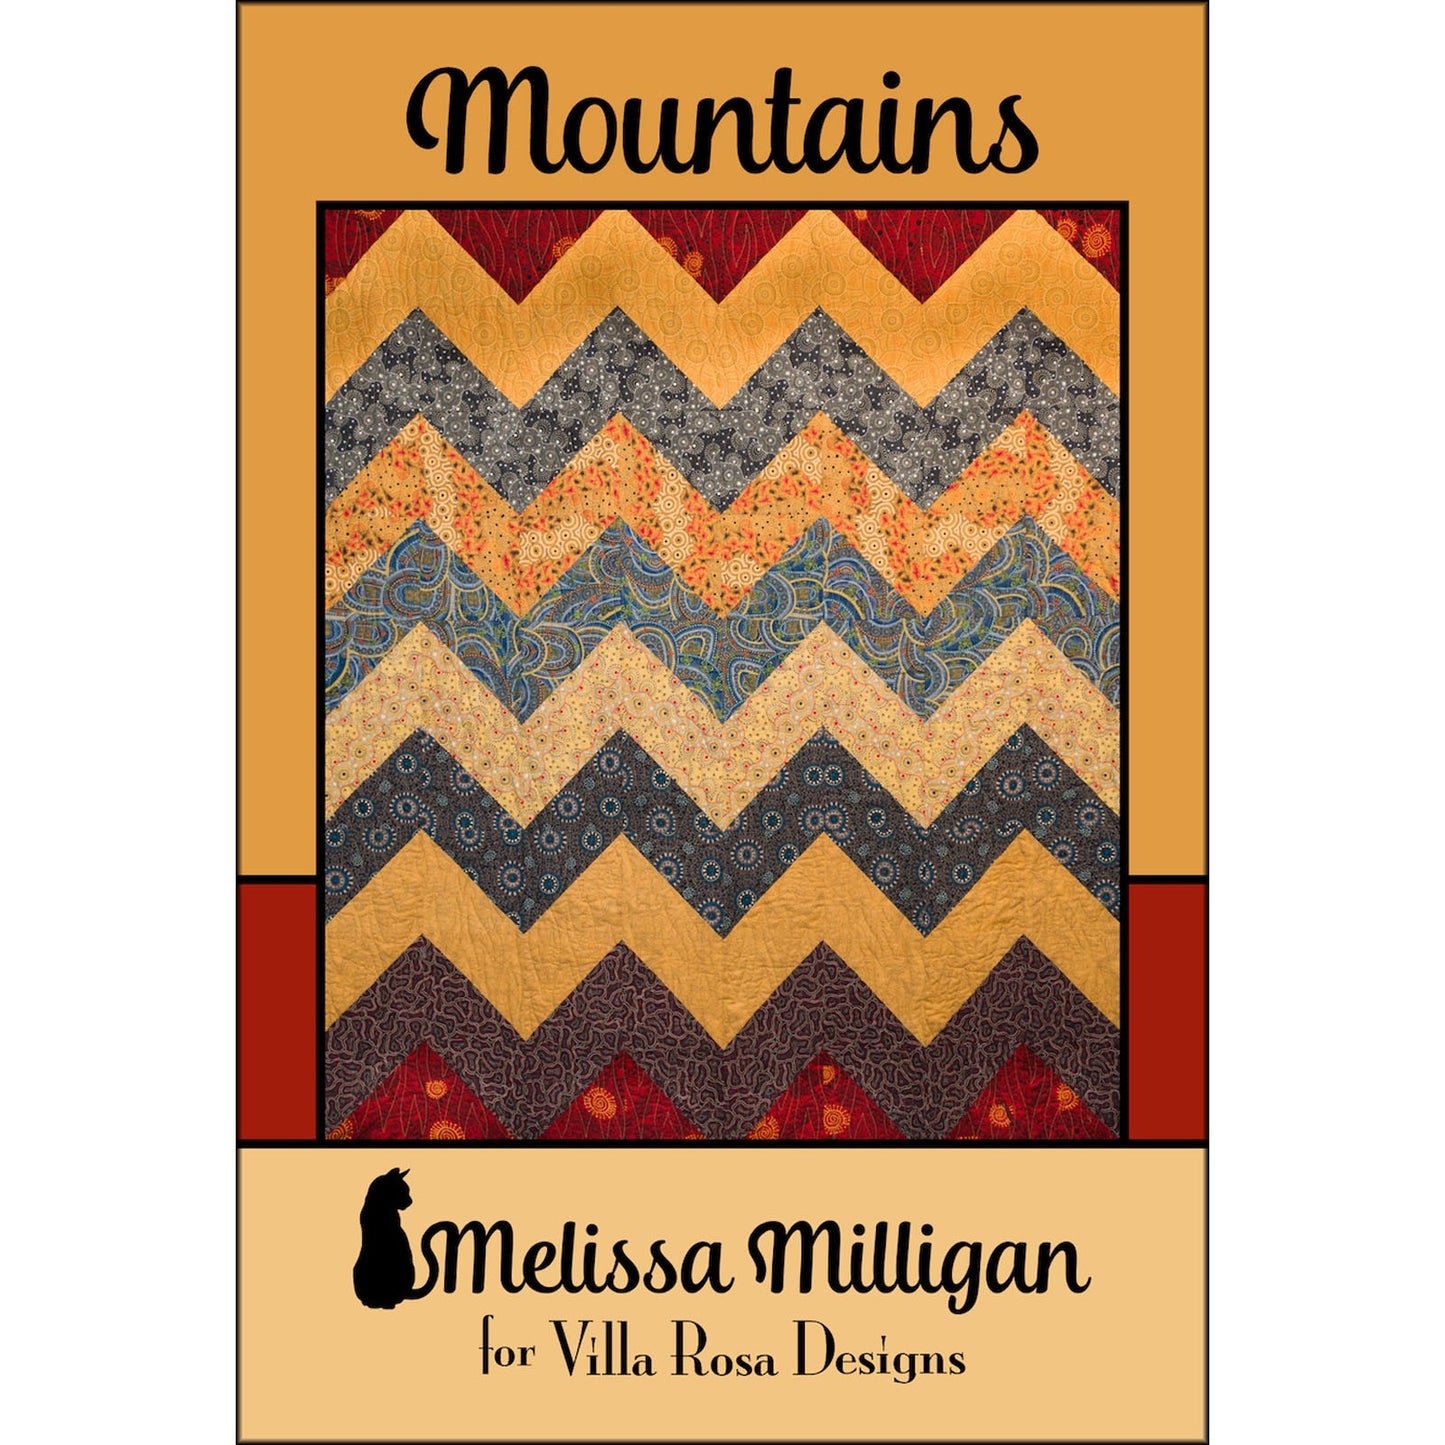 Mountains Quilt Pattern by Villa Rosa Designs